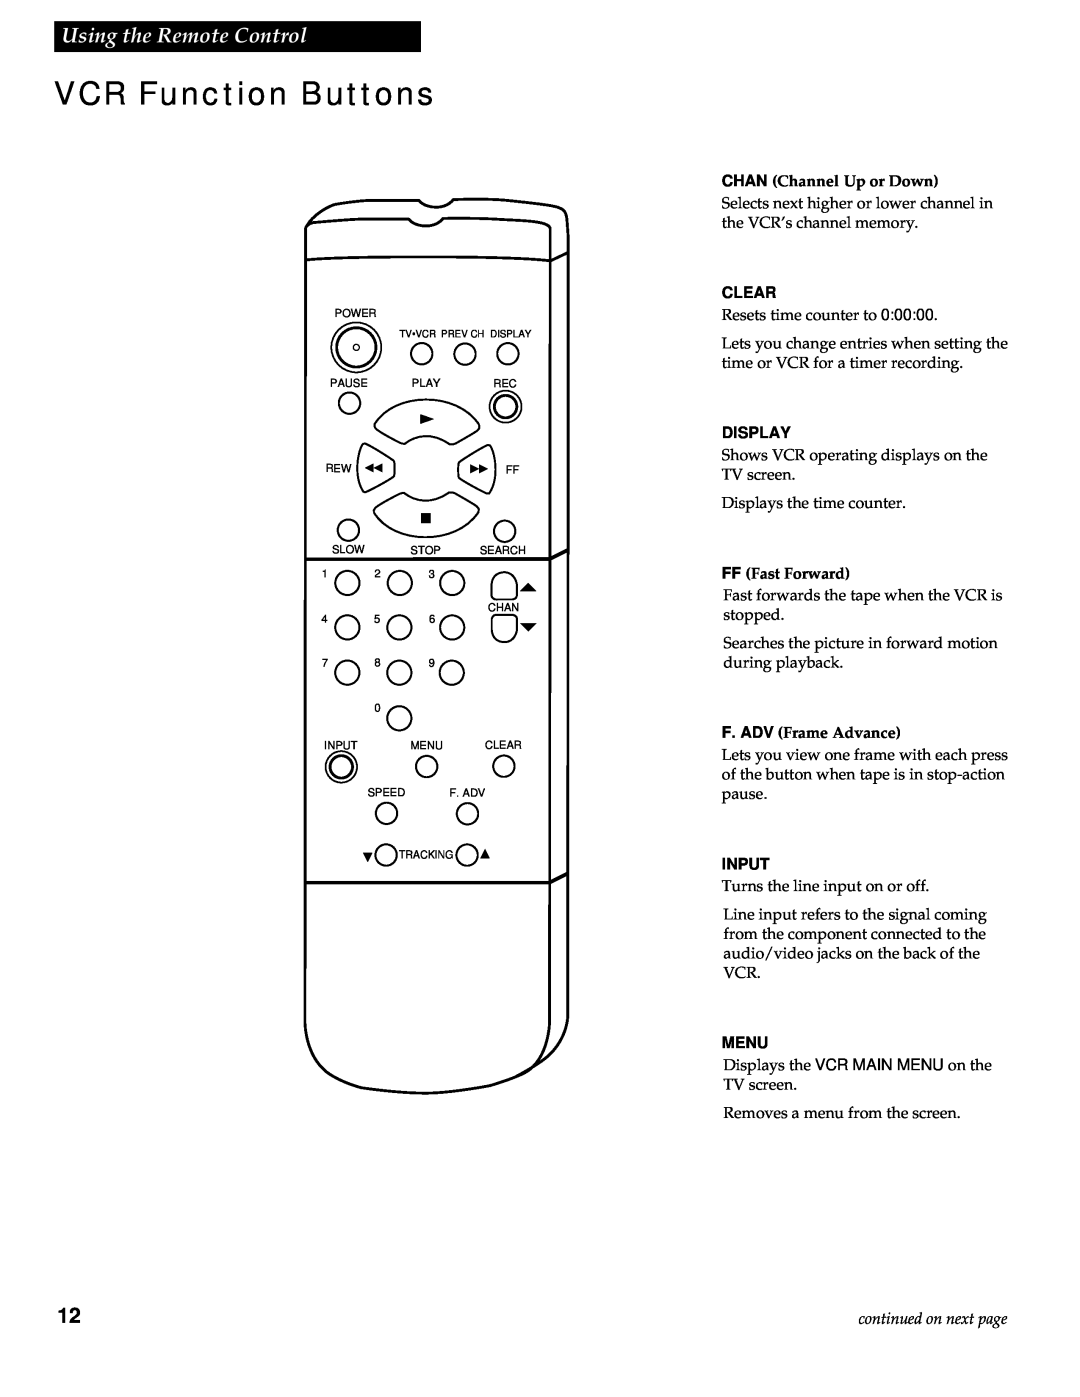 RCA VR602HF VCR Function Buttons, Using the Remote Control, CHAN Channel Up or Down, Clear, Display, FF Fast Forward, Menu 